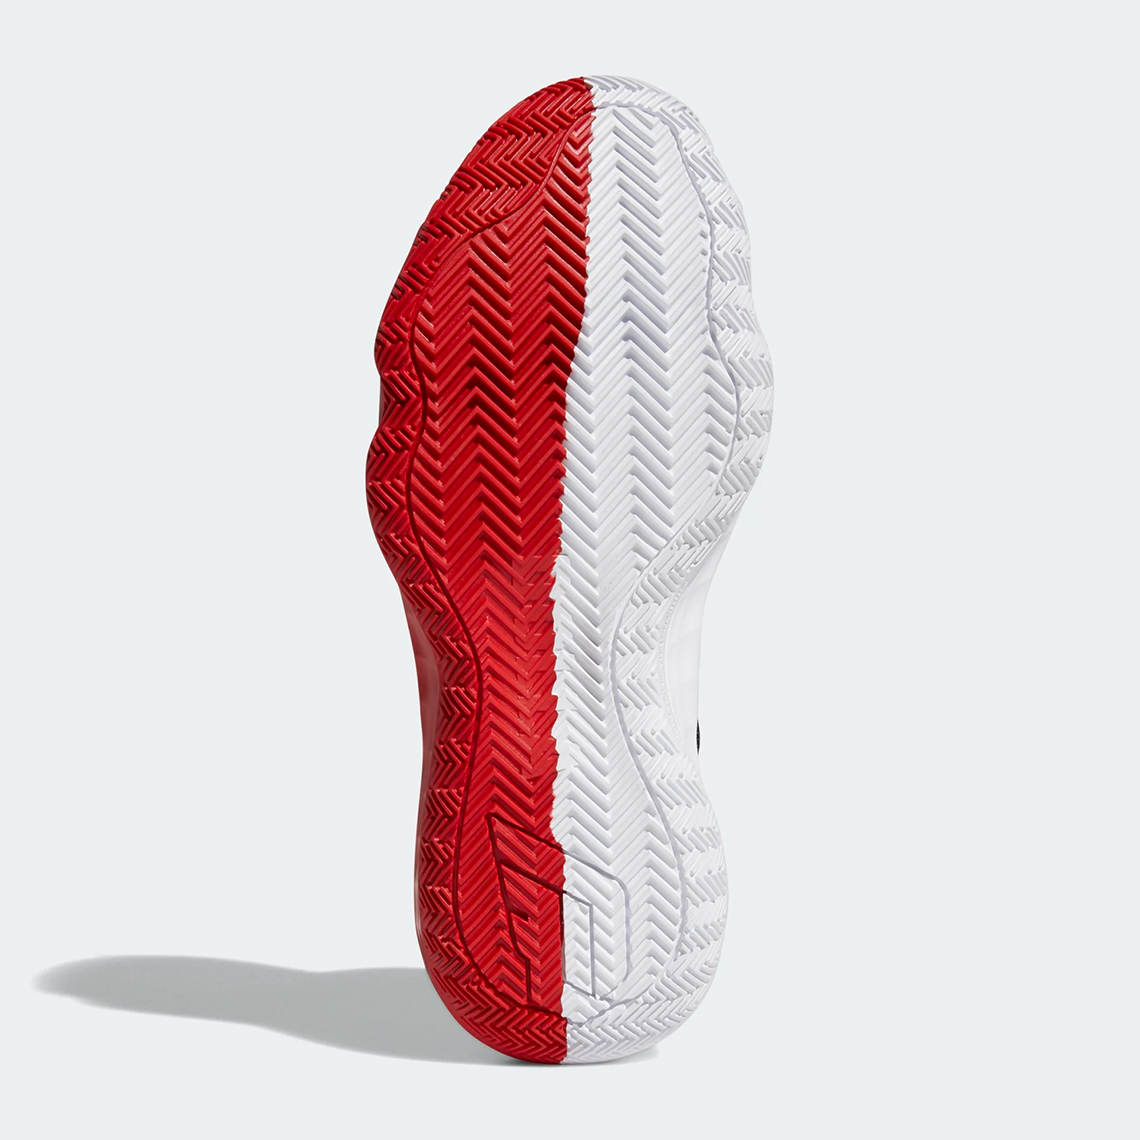 Adidas Dame 6 Red Fy0850 5